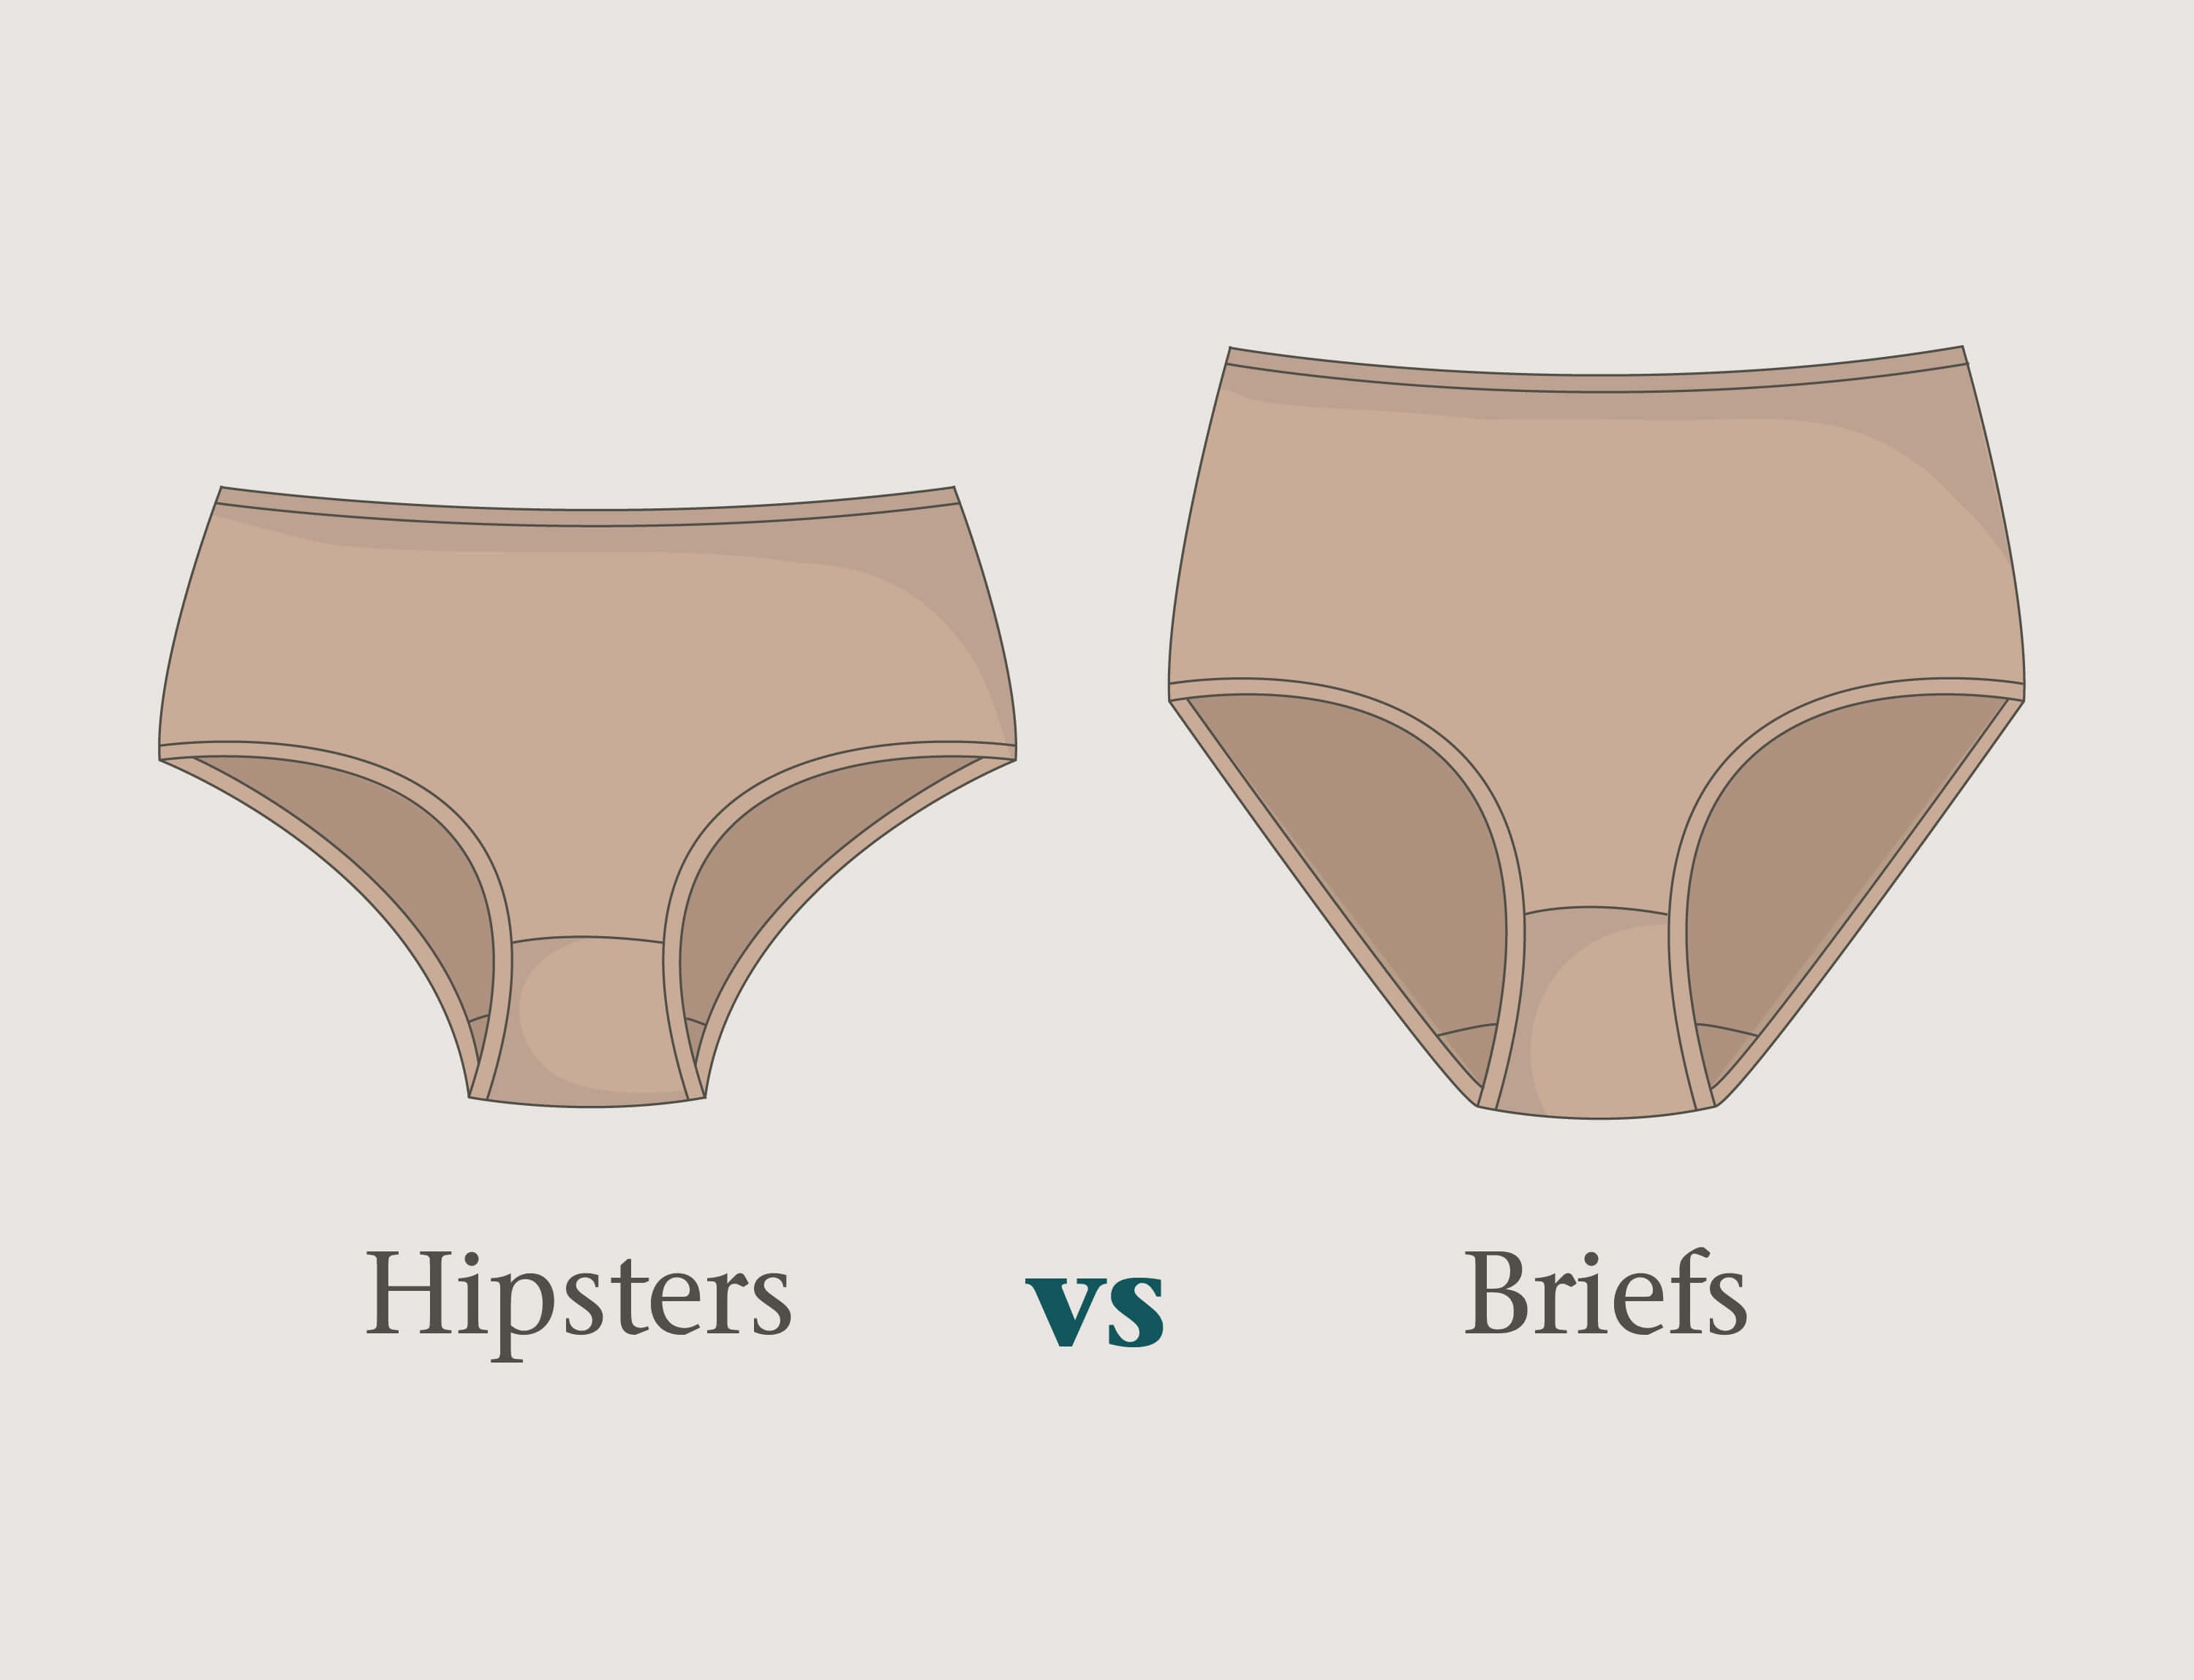 How often should you change your underwear?